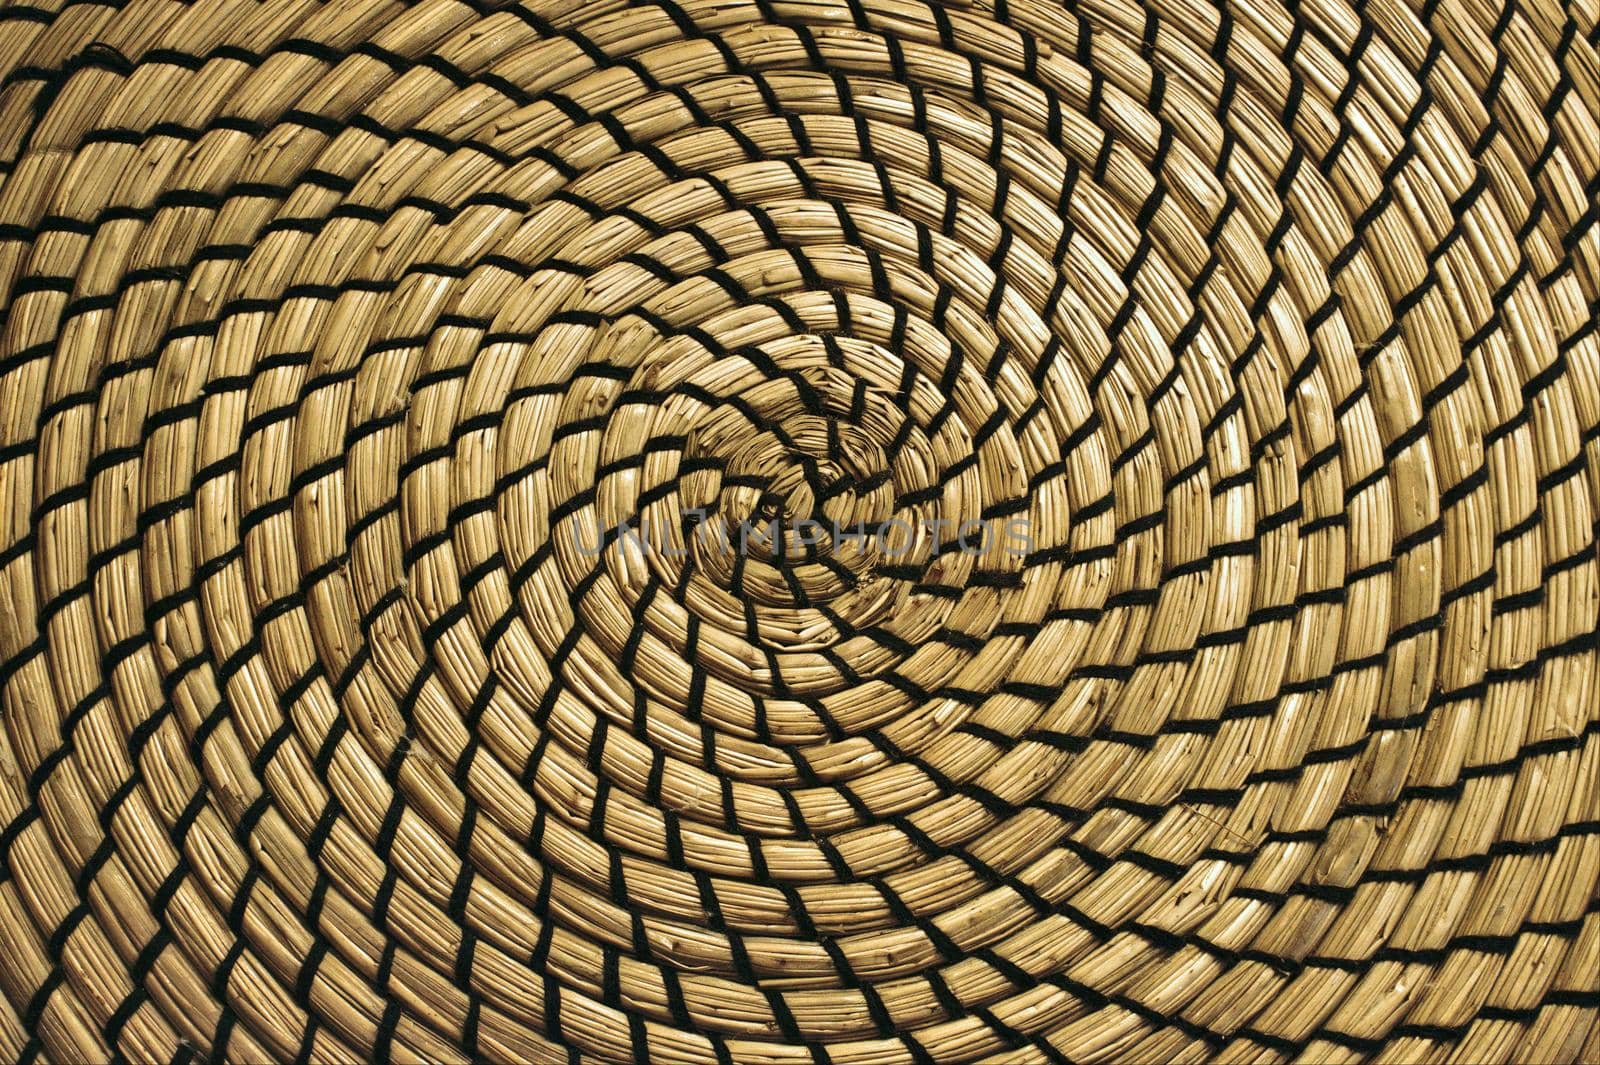 Close-up of circular straw mat with a spiral pattern